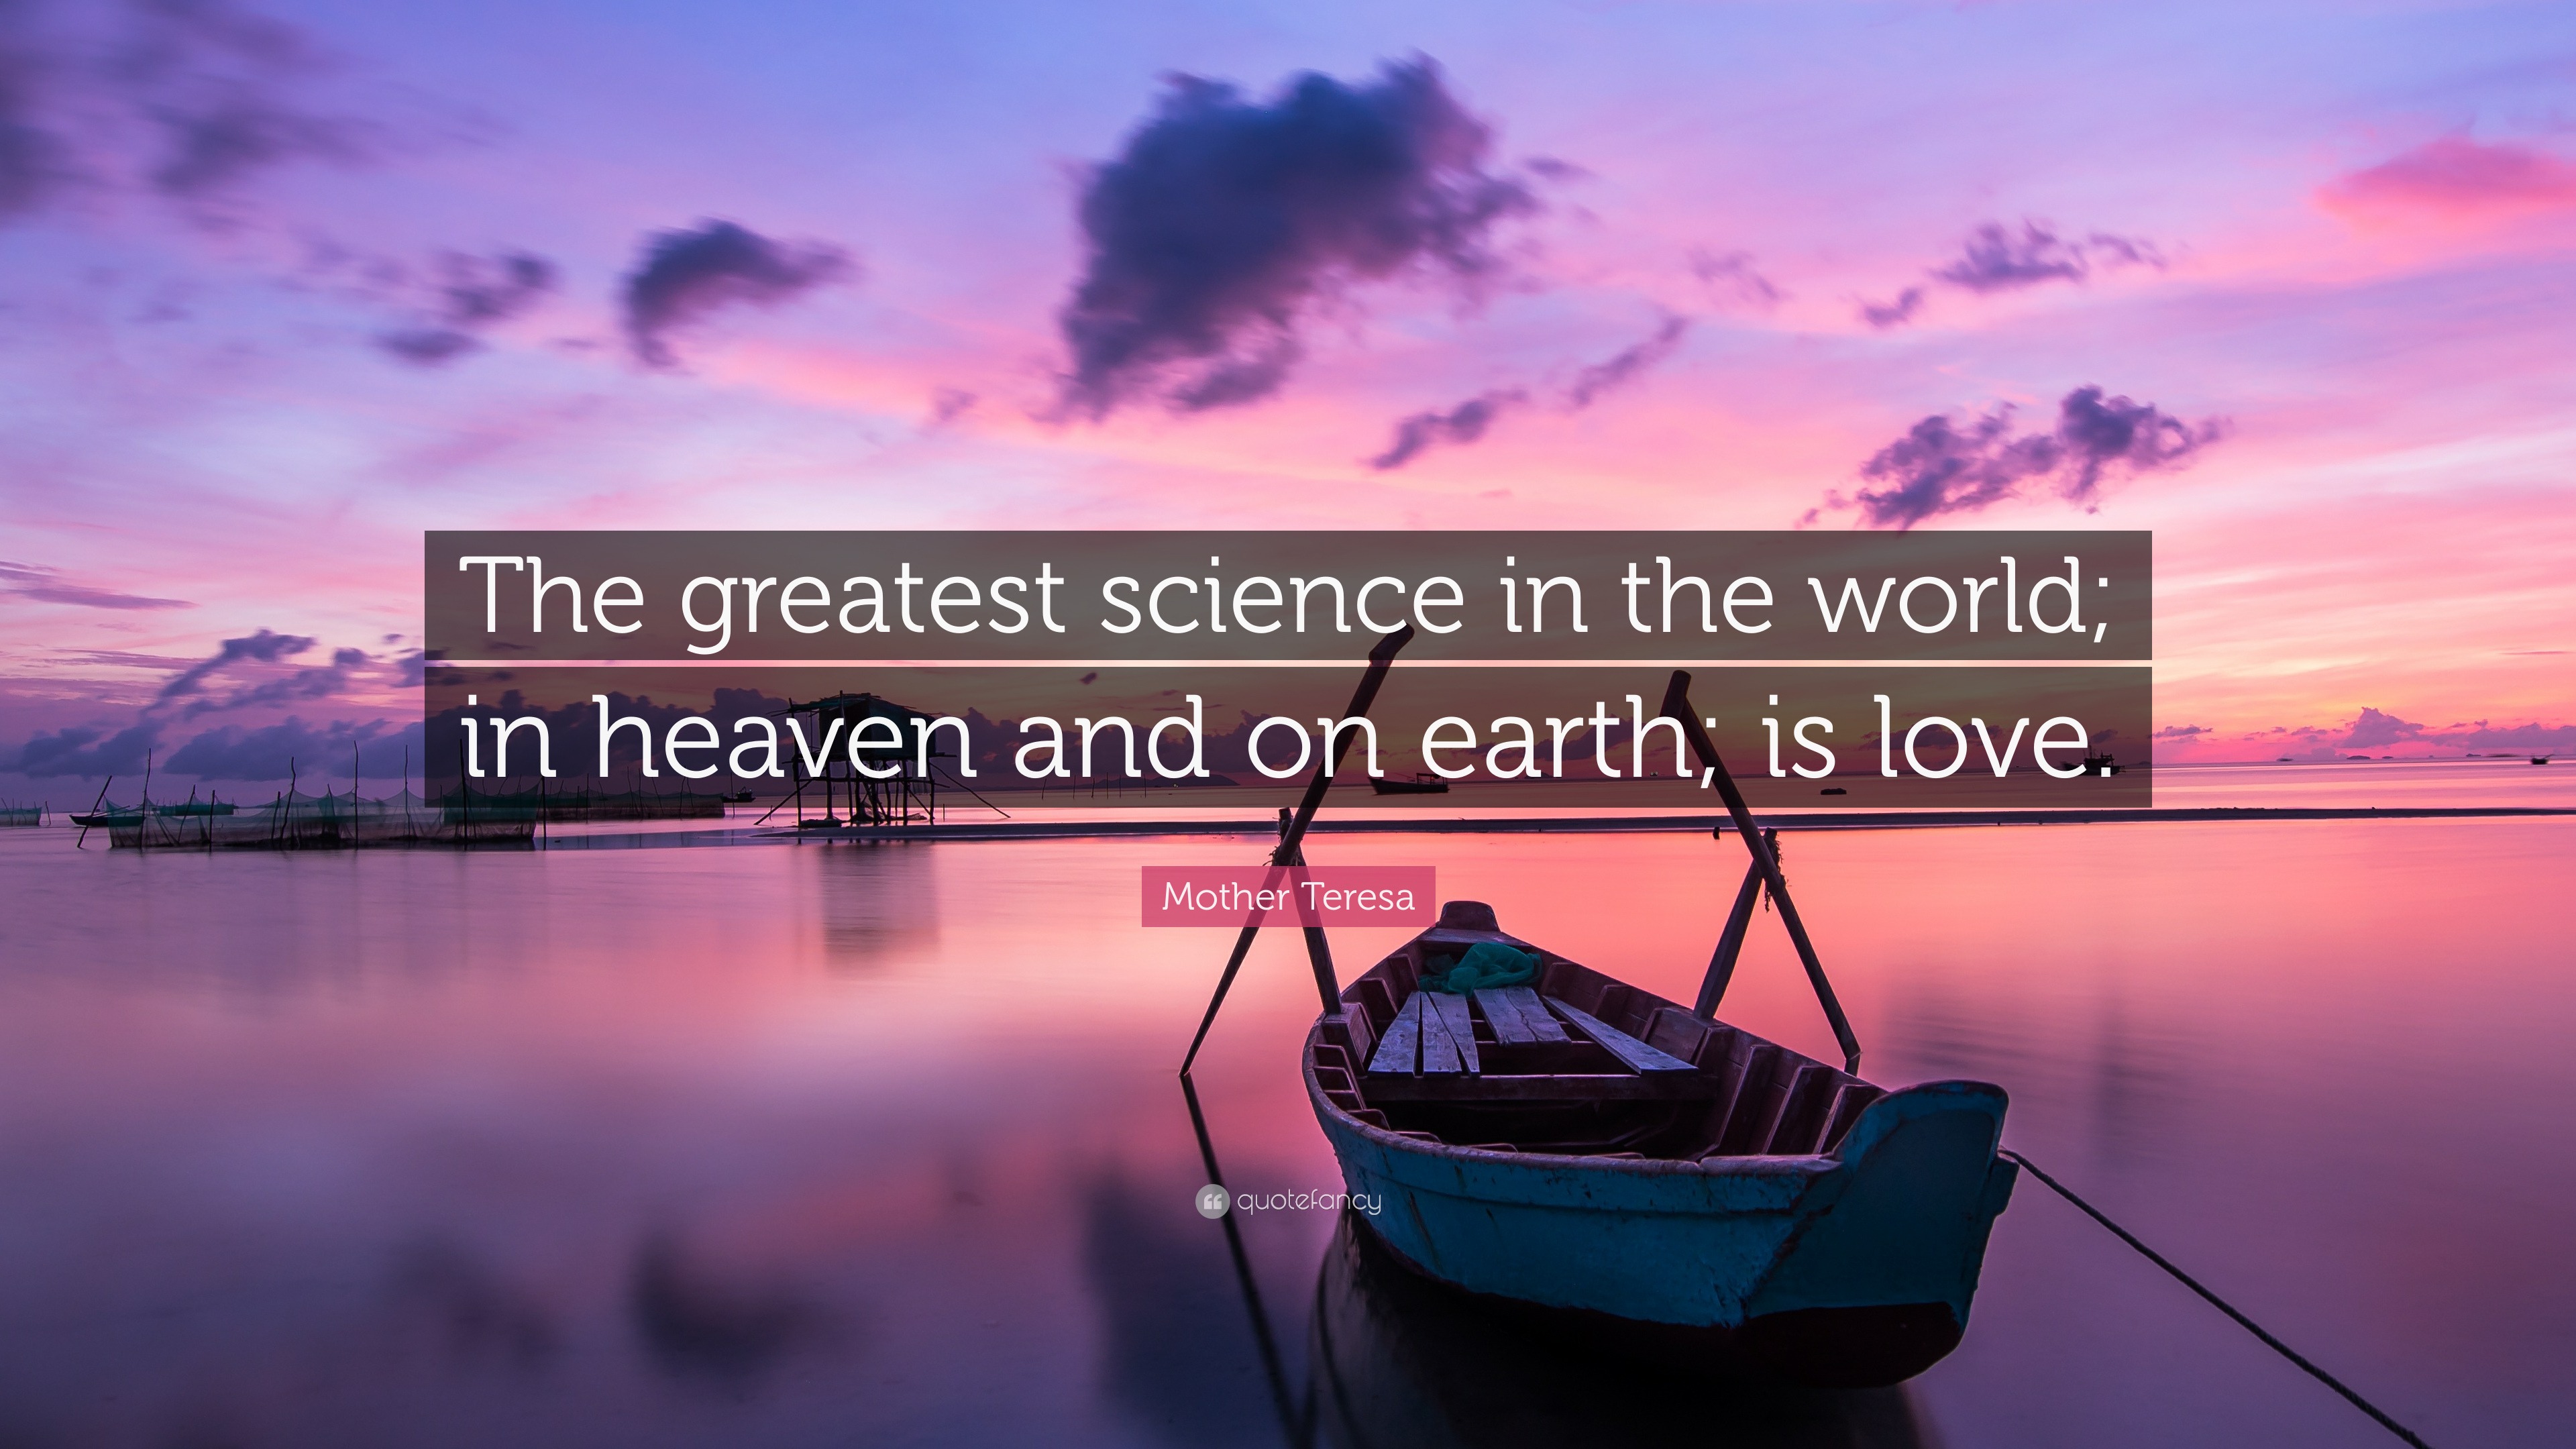 Mother Teresa Quote “The greatest science in the world in heaven and on